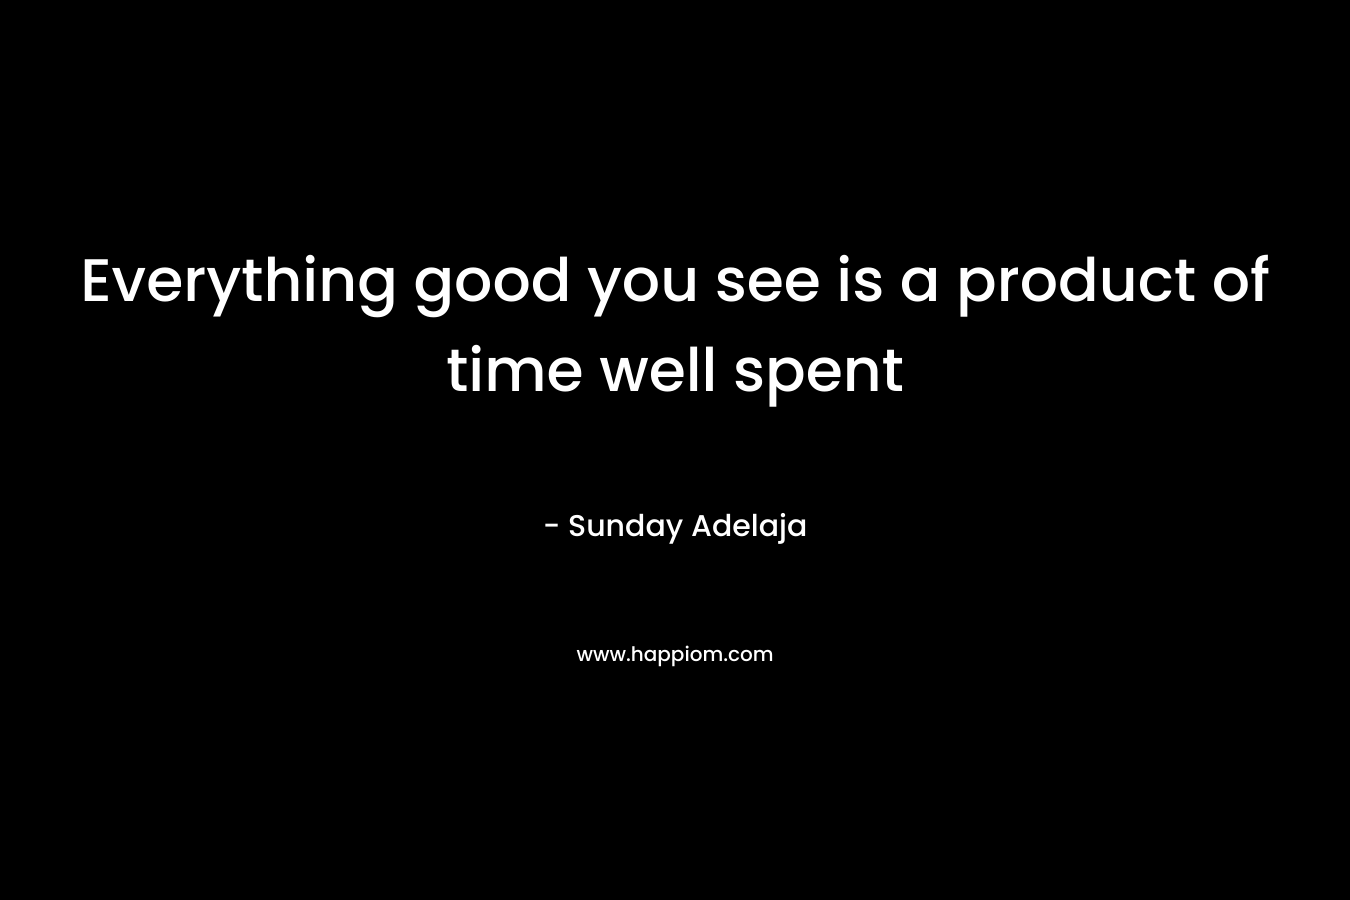 Everything good you see is a product of time well spent